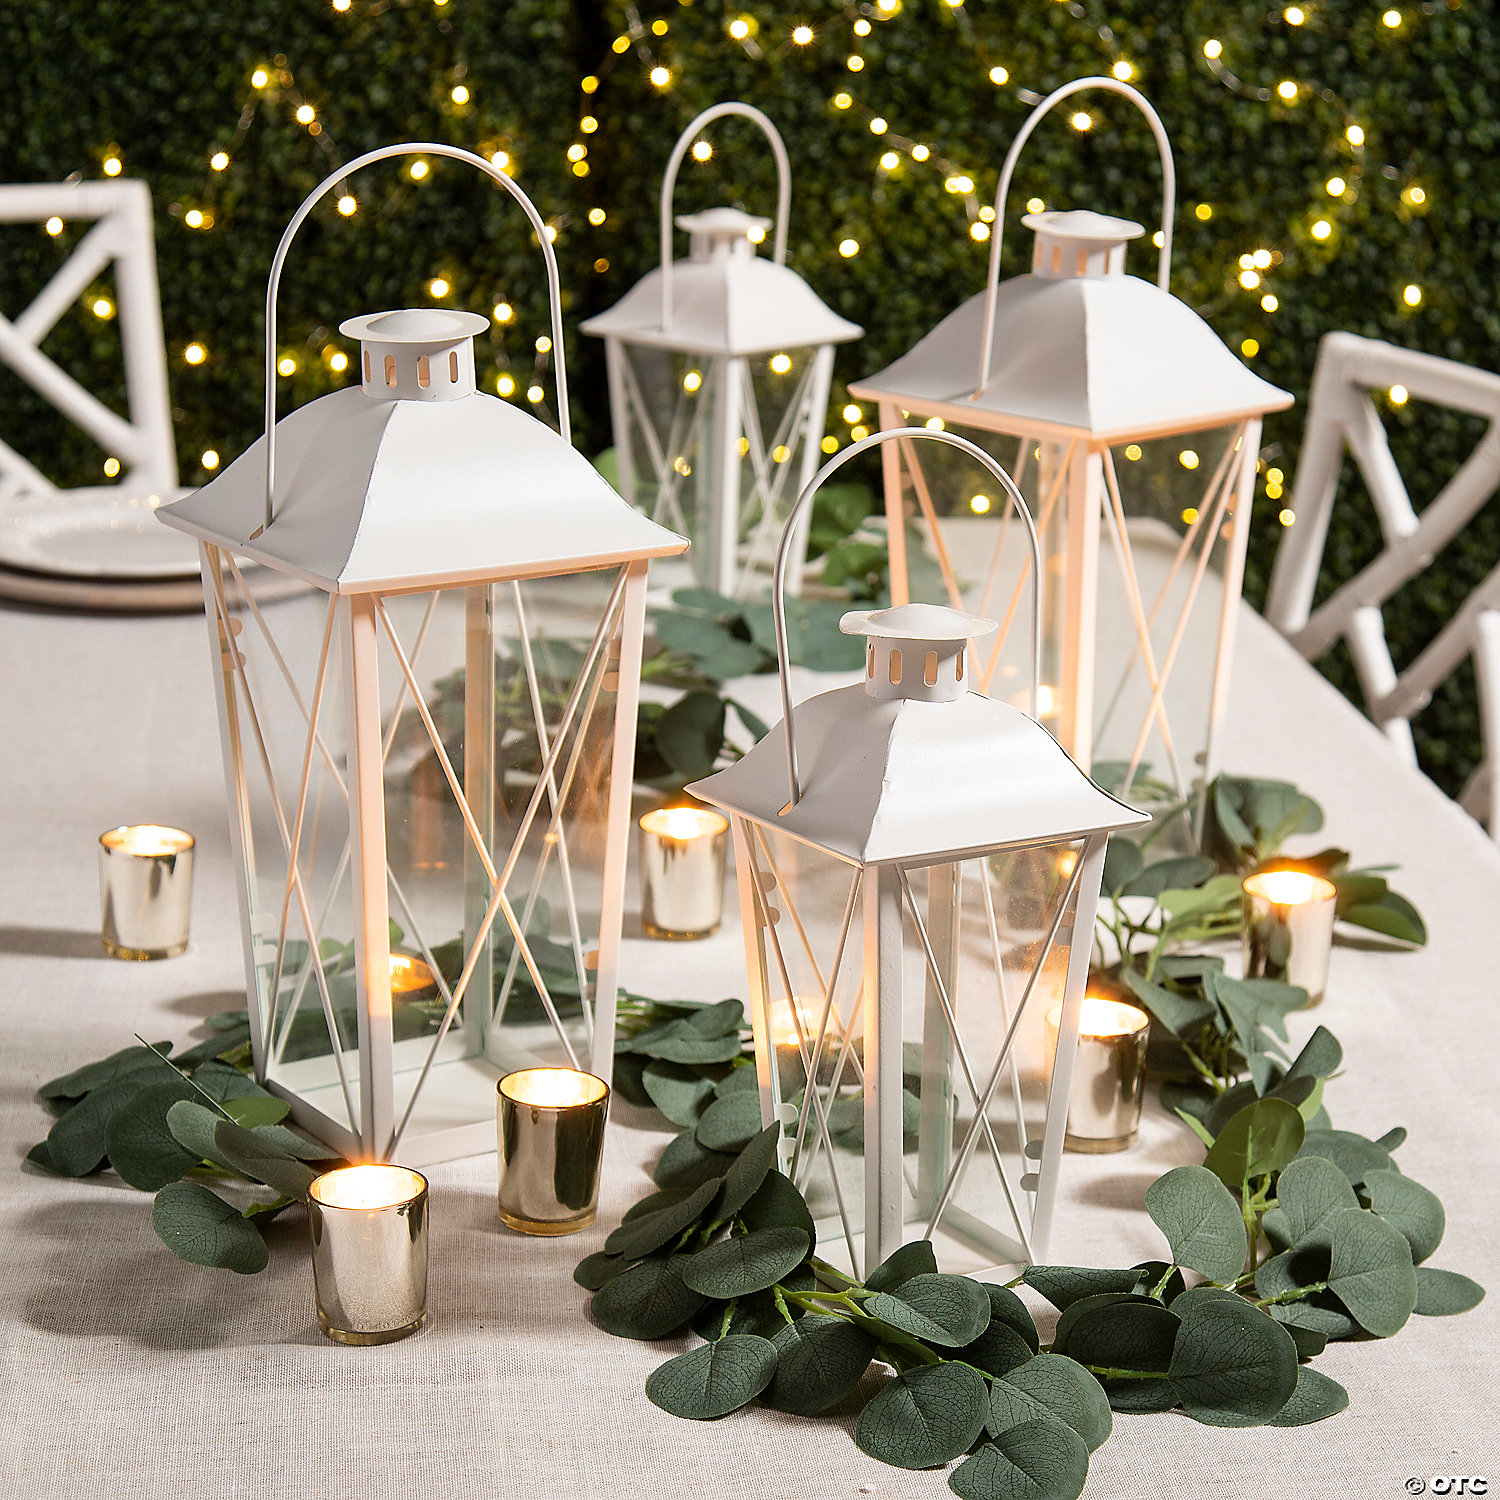 This wedding eucalyptus table decoration set is the perfect addition to any wedding. It includes eucalyptus branches, lanterns and other decorations that can be used to create a beautiful and elegant table decoration. This set of decorations is easy to assemble and disassemble, so you can create a beautiful table decoration in minutes. This decoration is the perfect addition to any wedding and is sure to impress your guests.